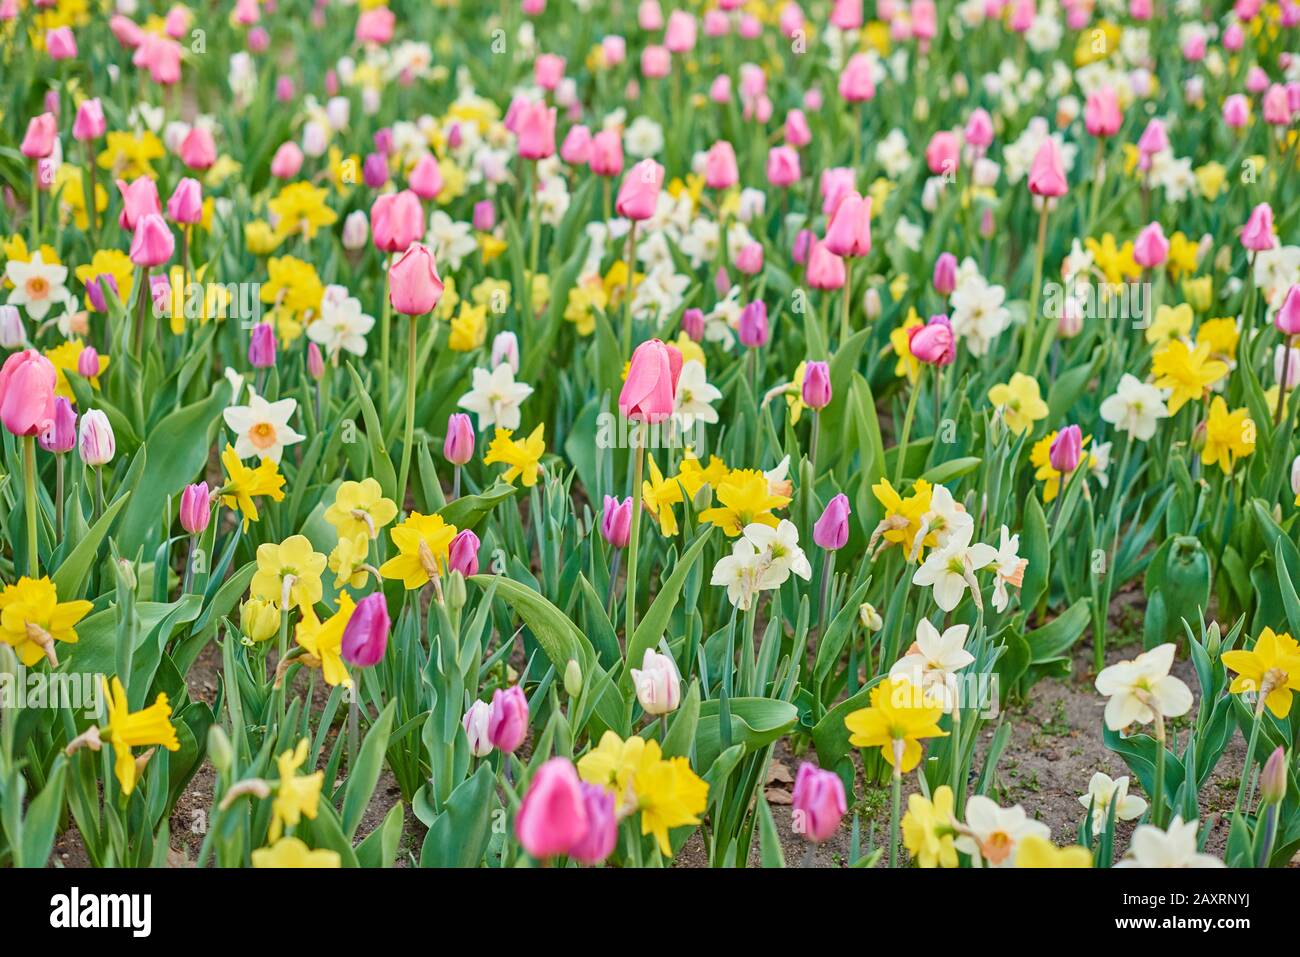 Garden Tulips, Tulipa Gesneriana and Daffodils, Narcissus Cultivars Flowers, Spring Stock Photo